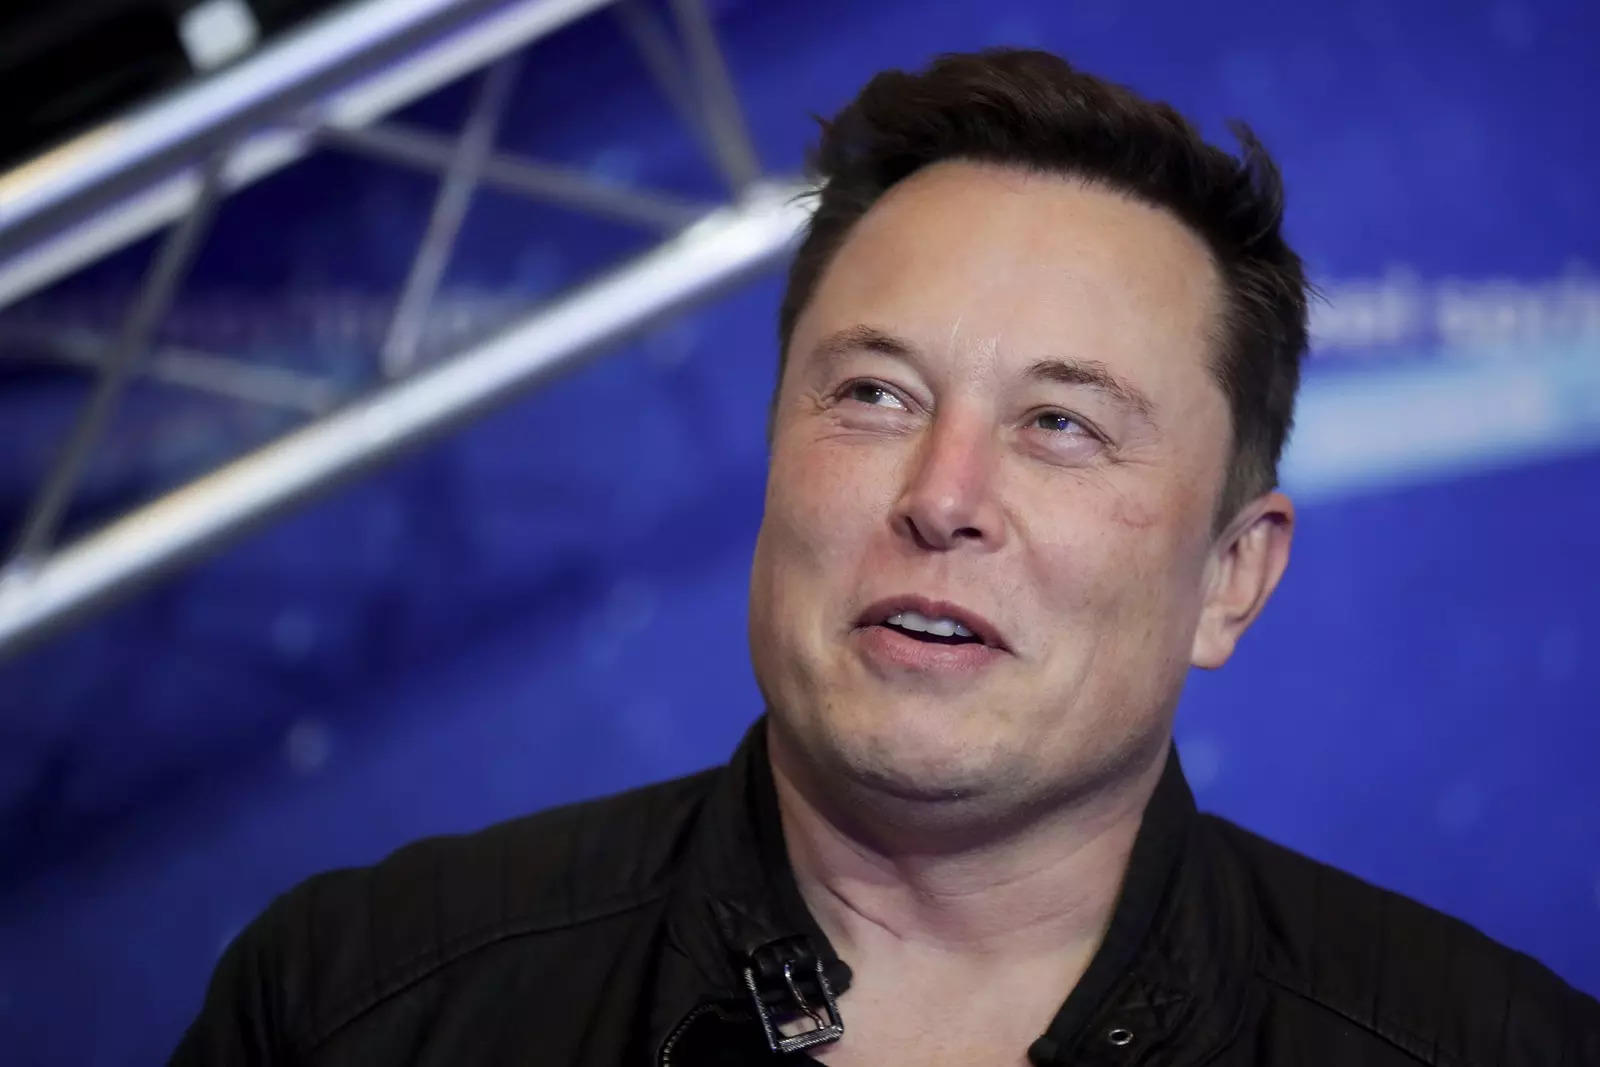 "You can't pay the same price for something that is much worse than they claimed," Musk said.